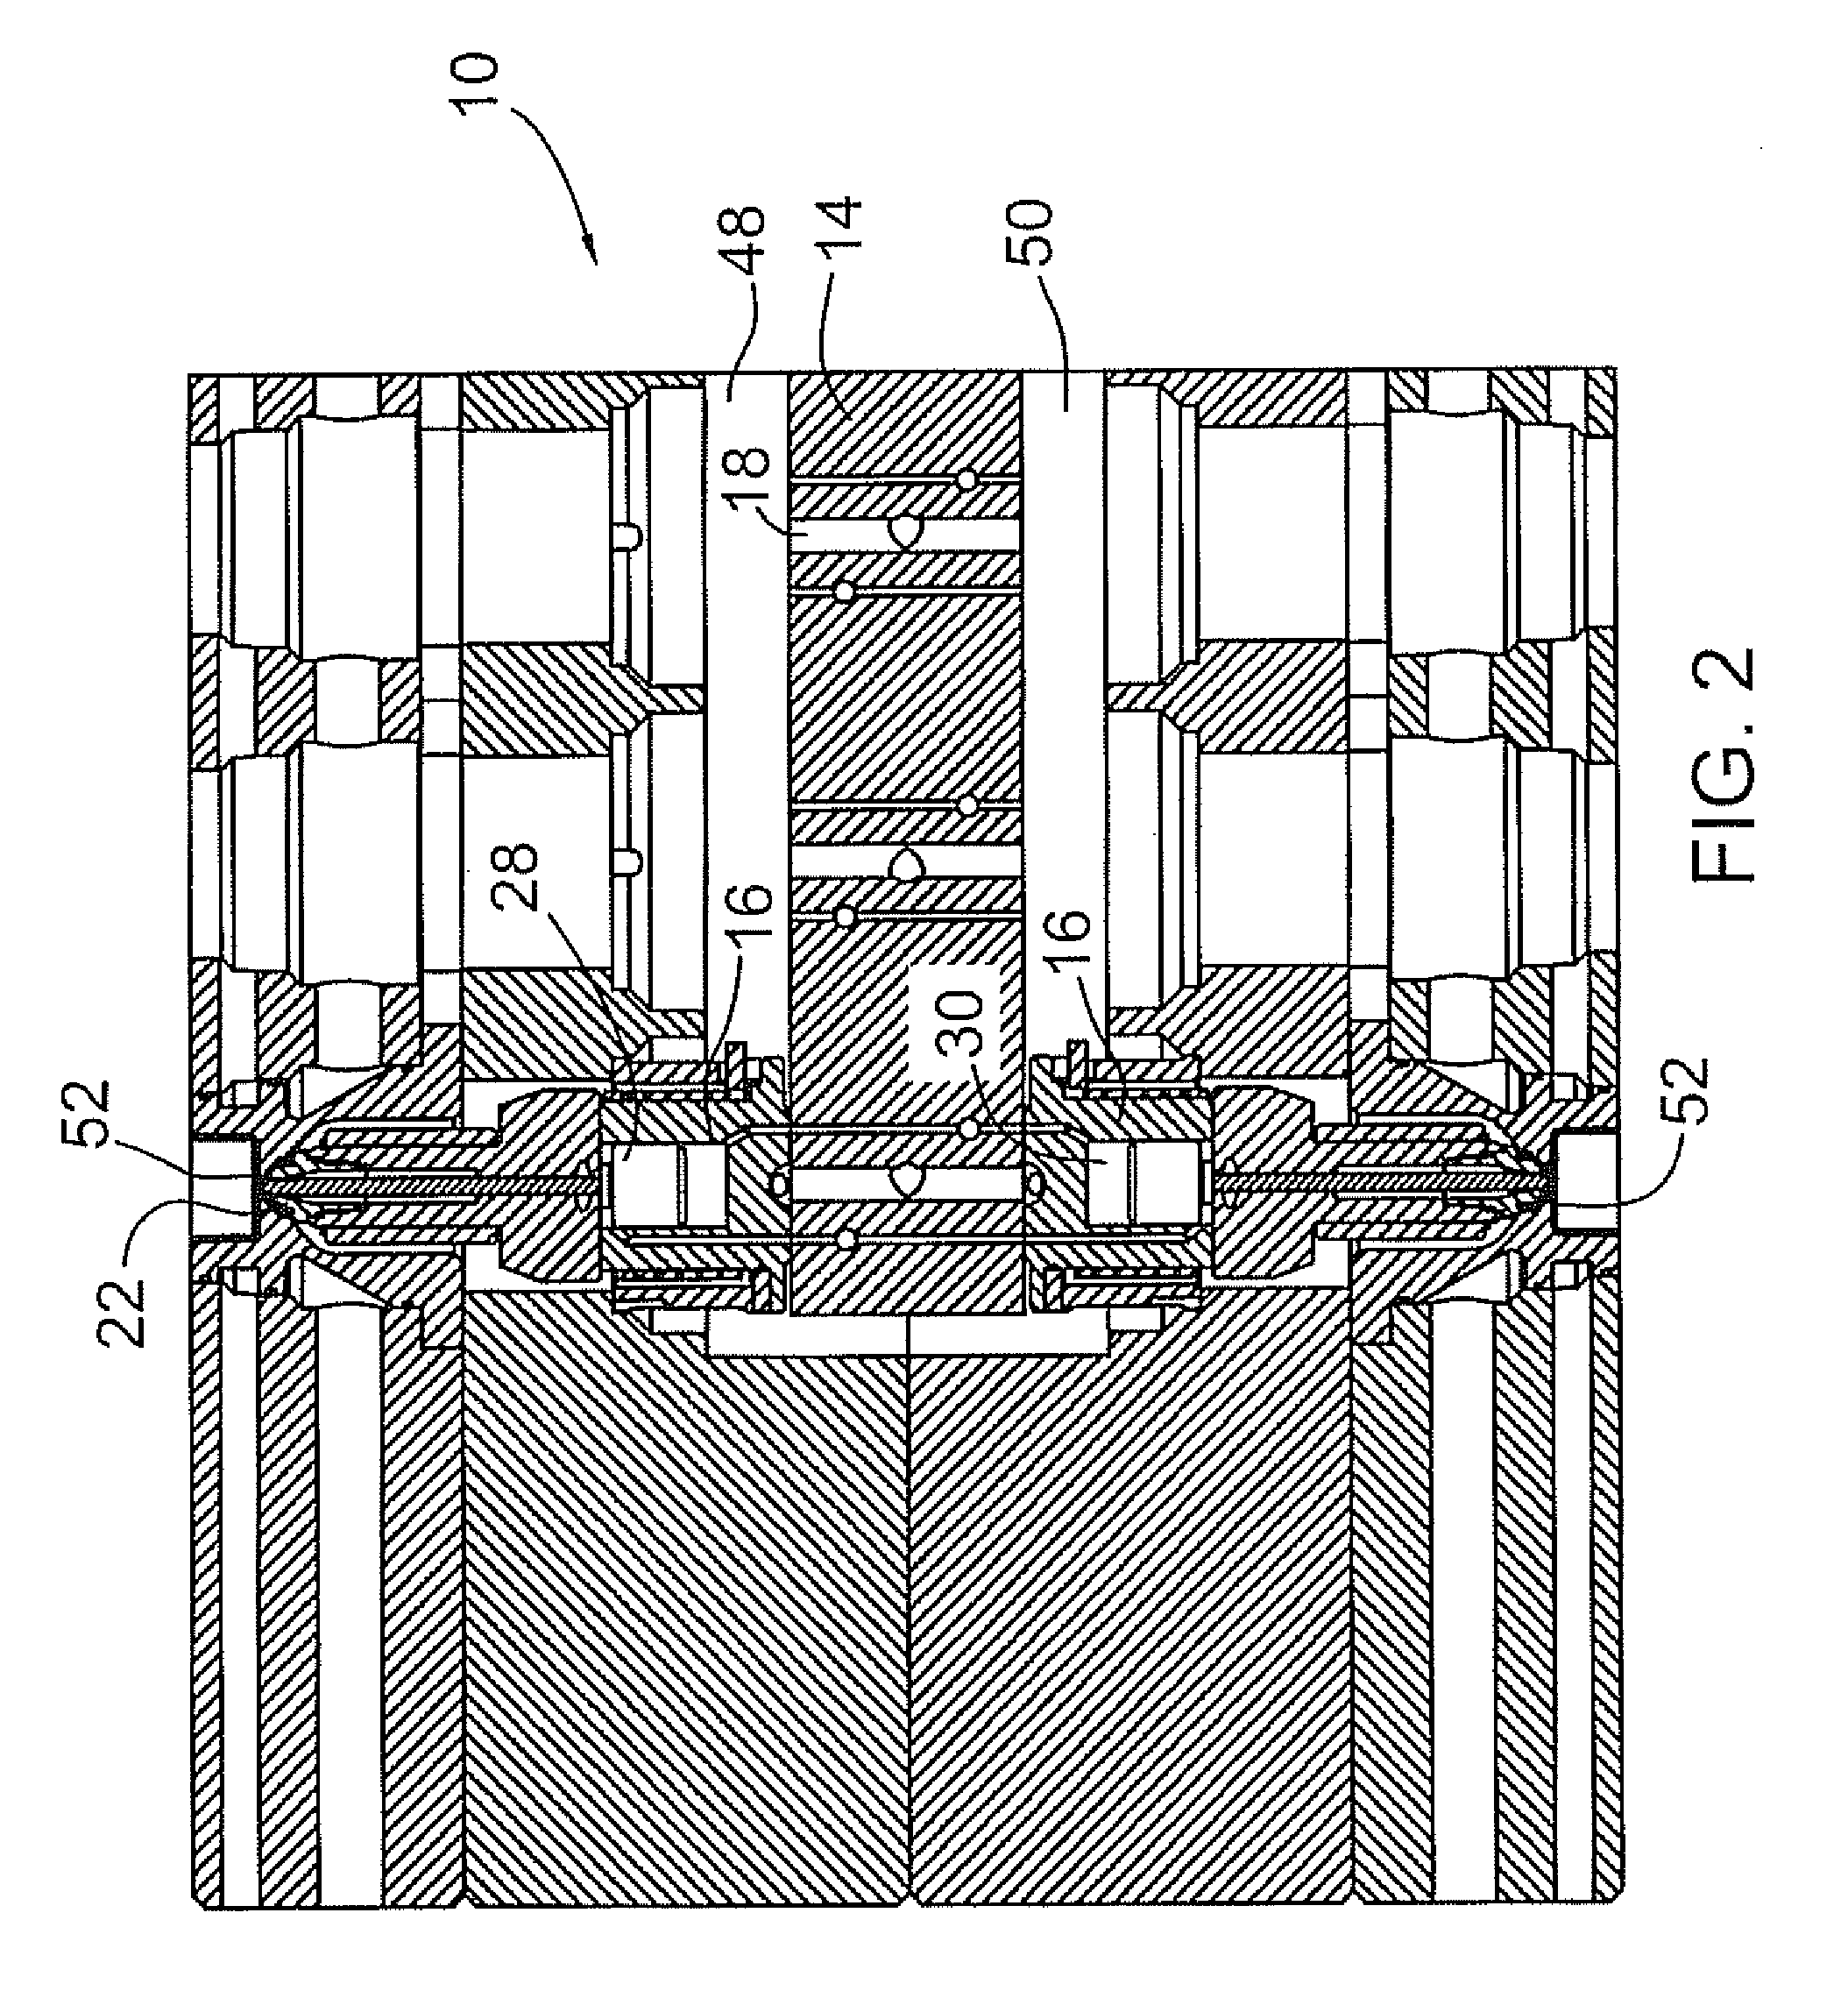 Injection apparatus for injection molding of thermoplastic parts